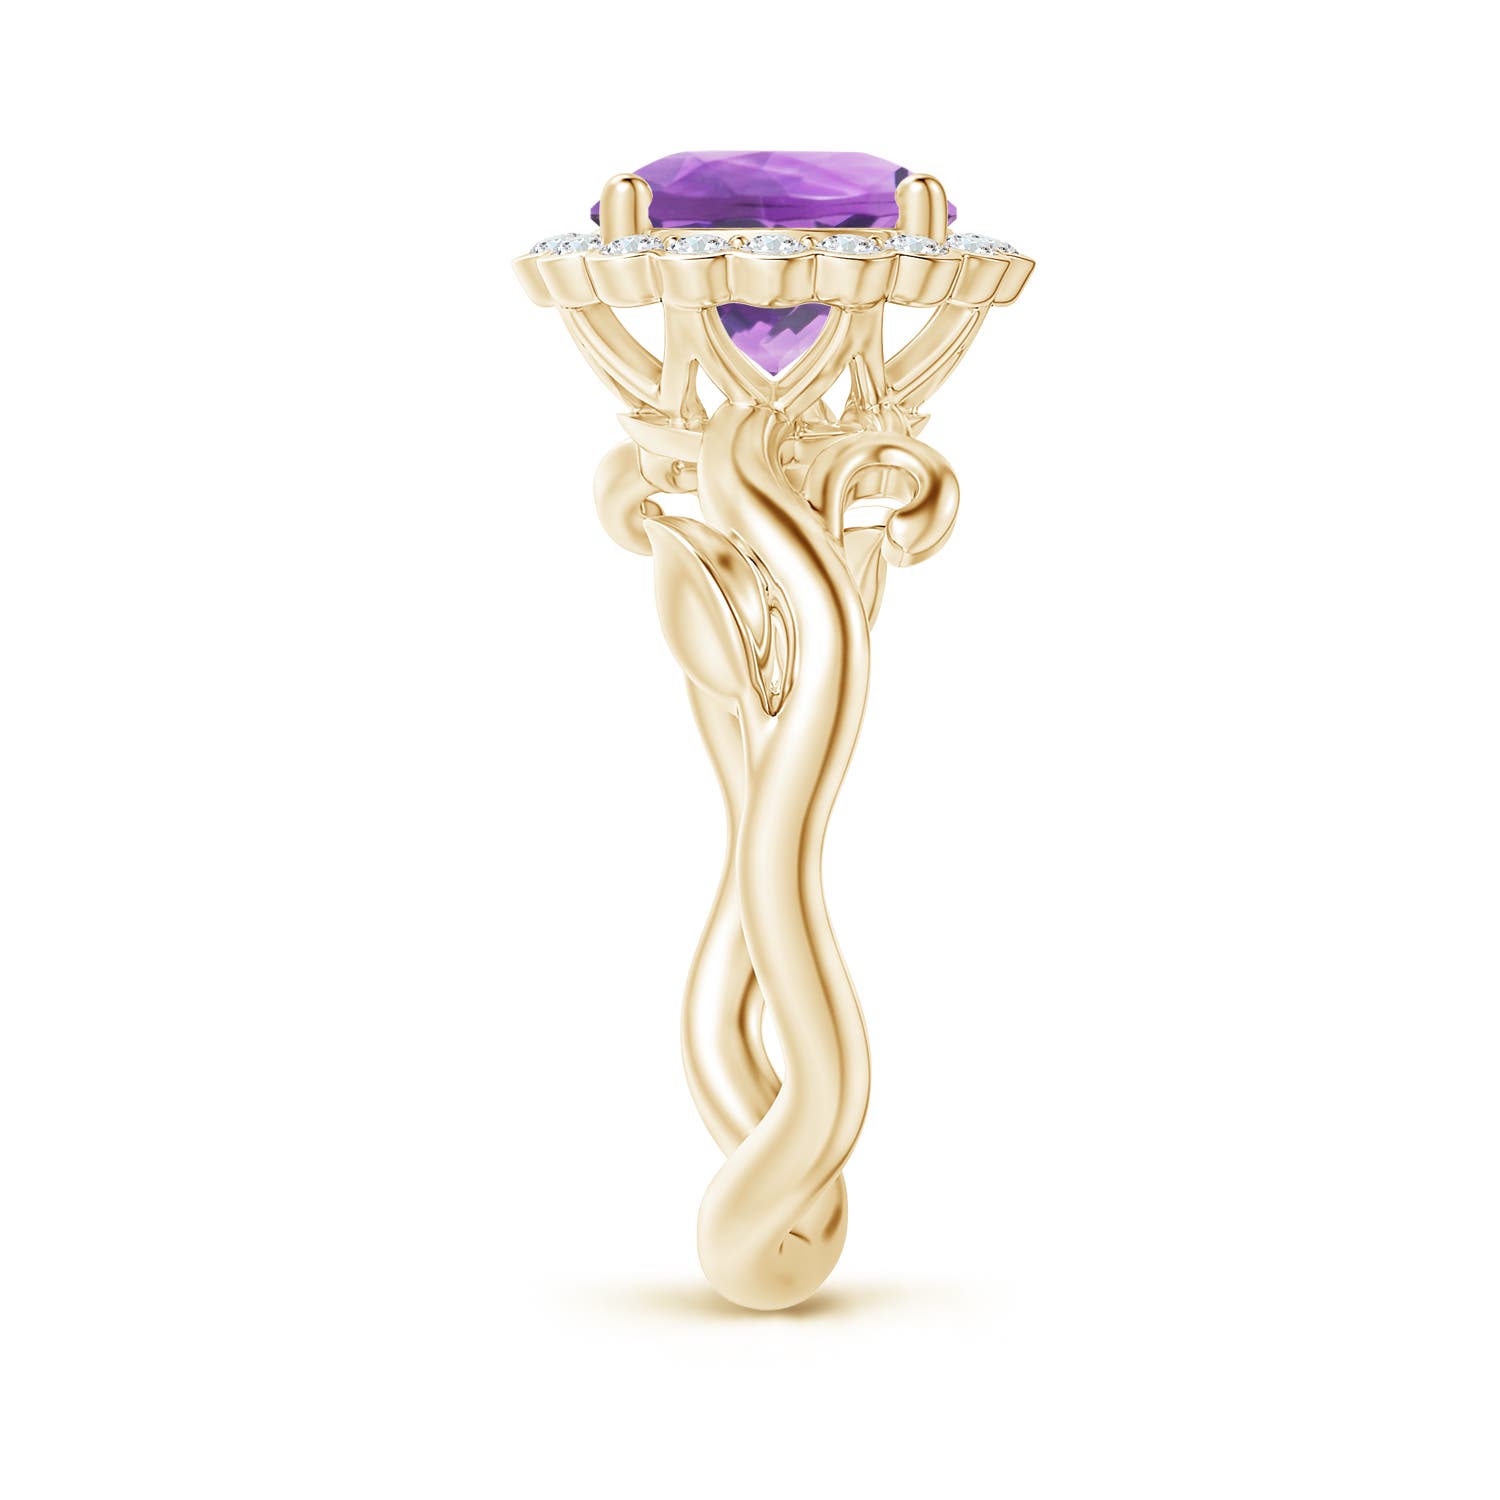 A - Amethyst / 1.95 CT / 14 KT Yellow Gold